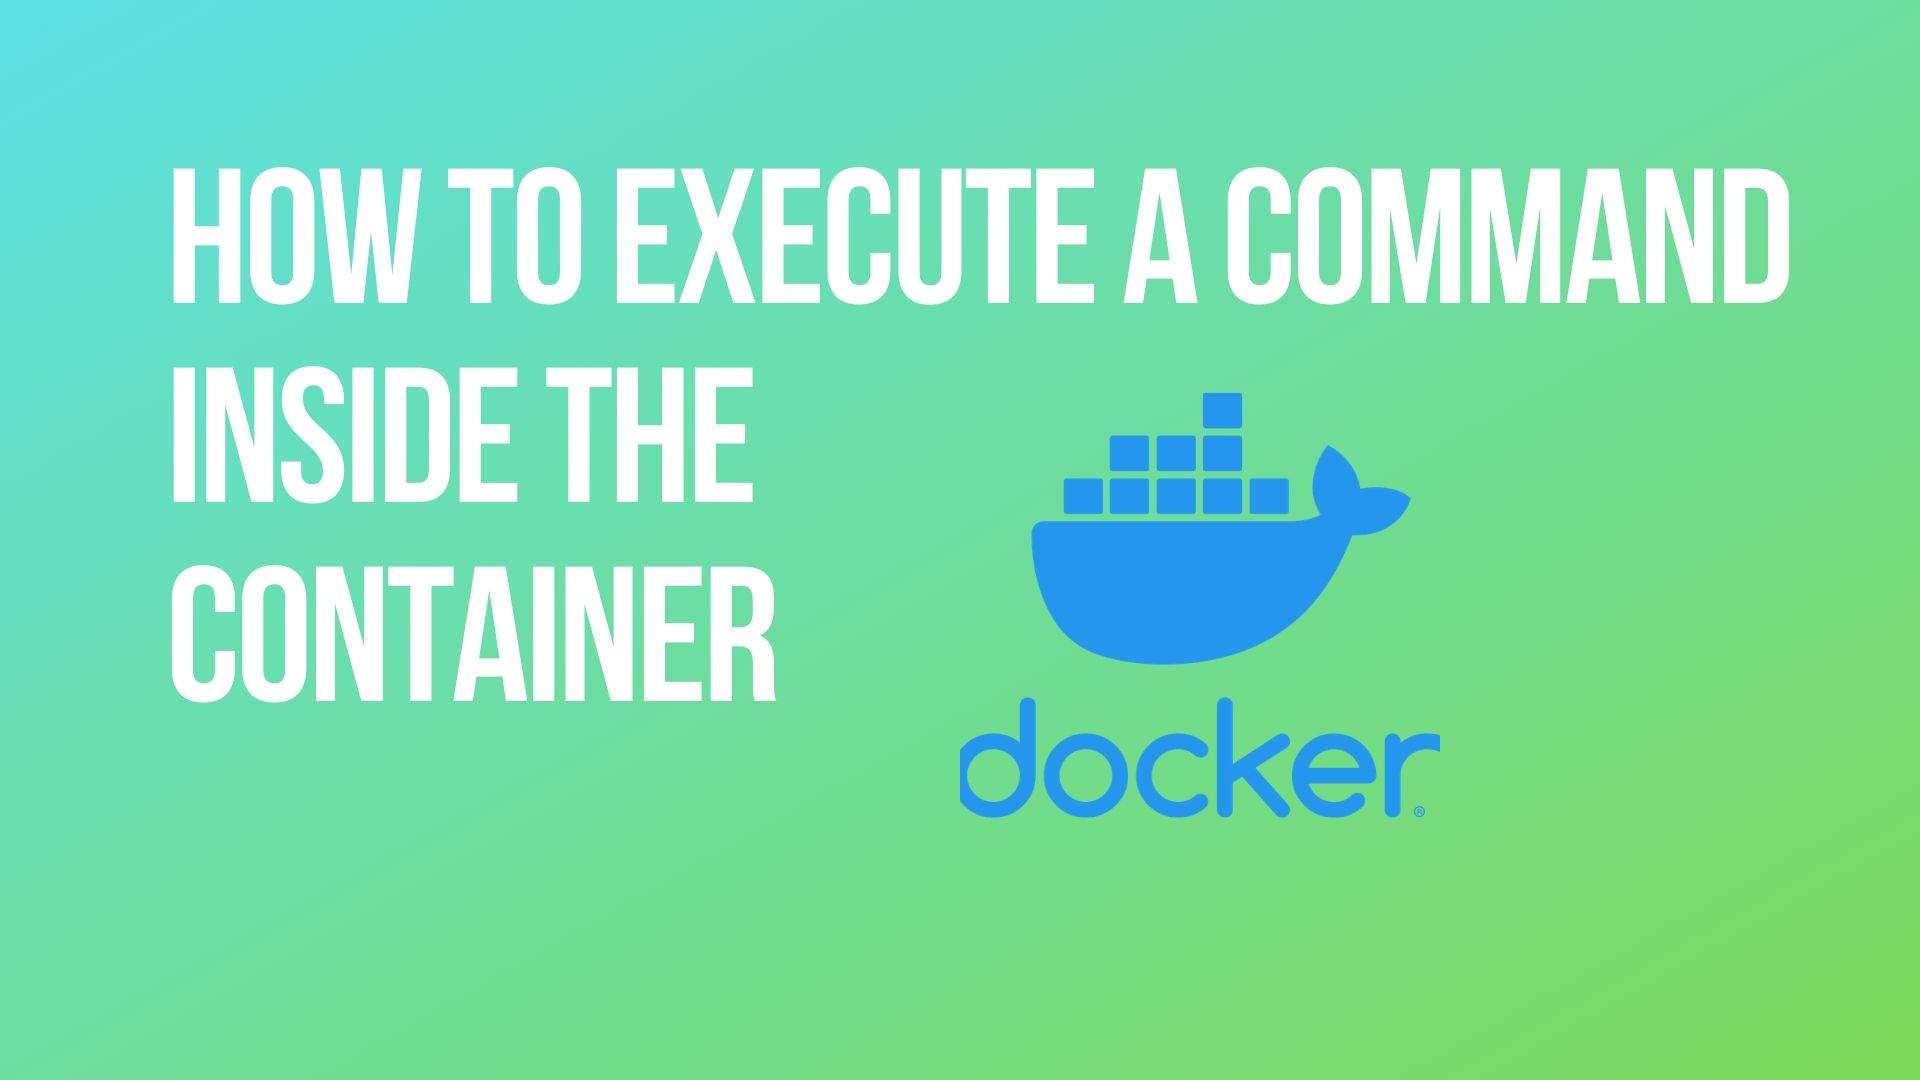 How to execute a command inside the container